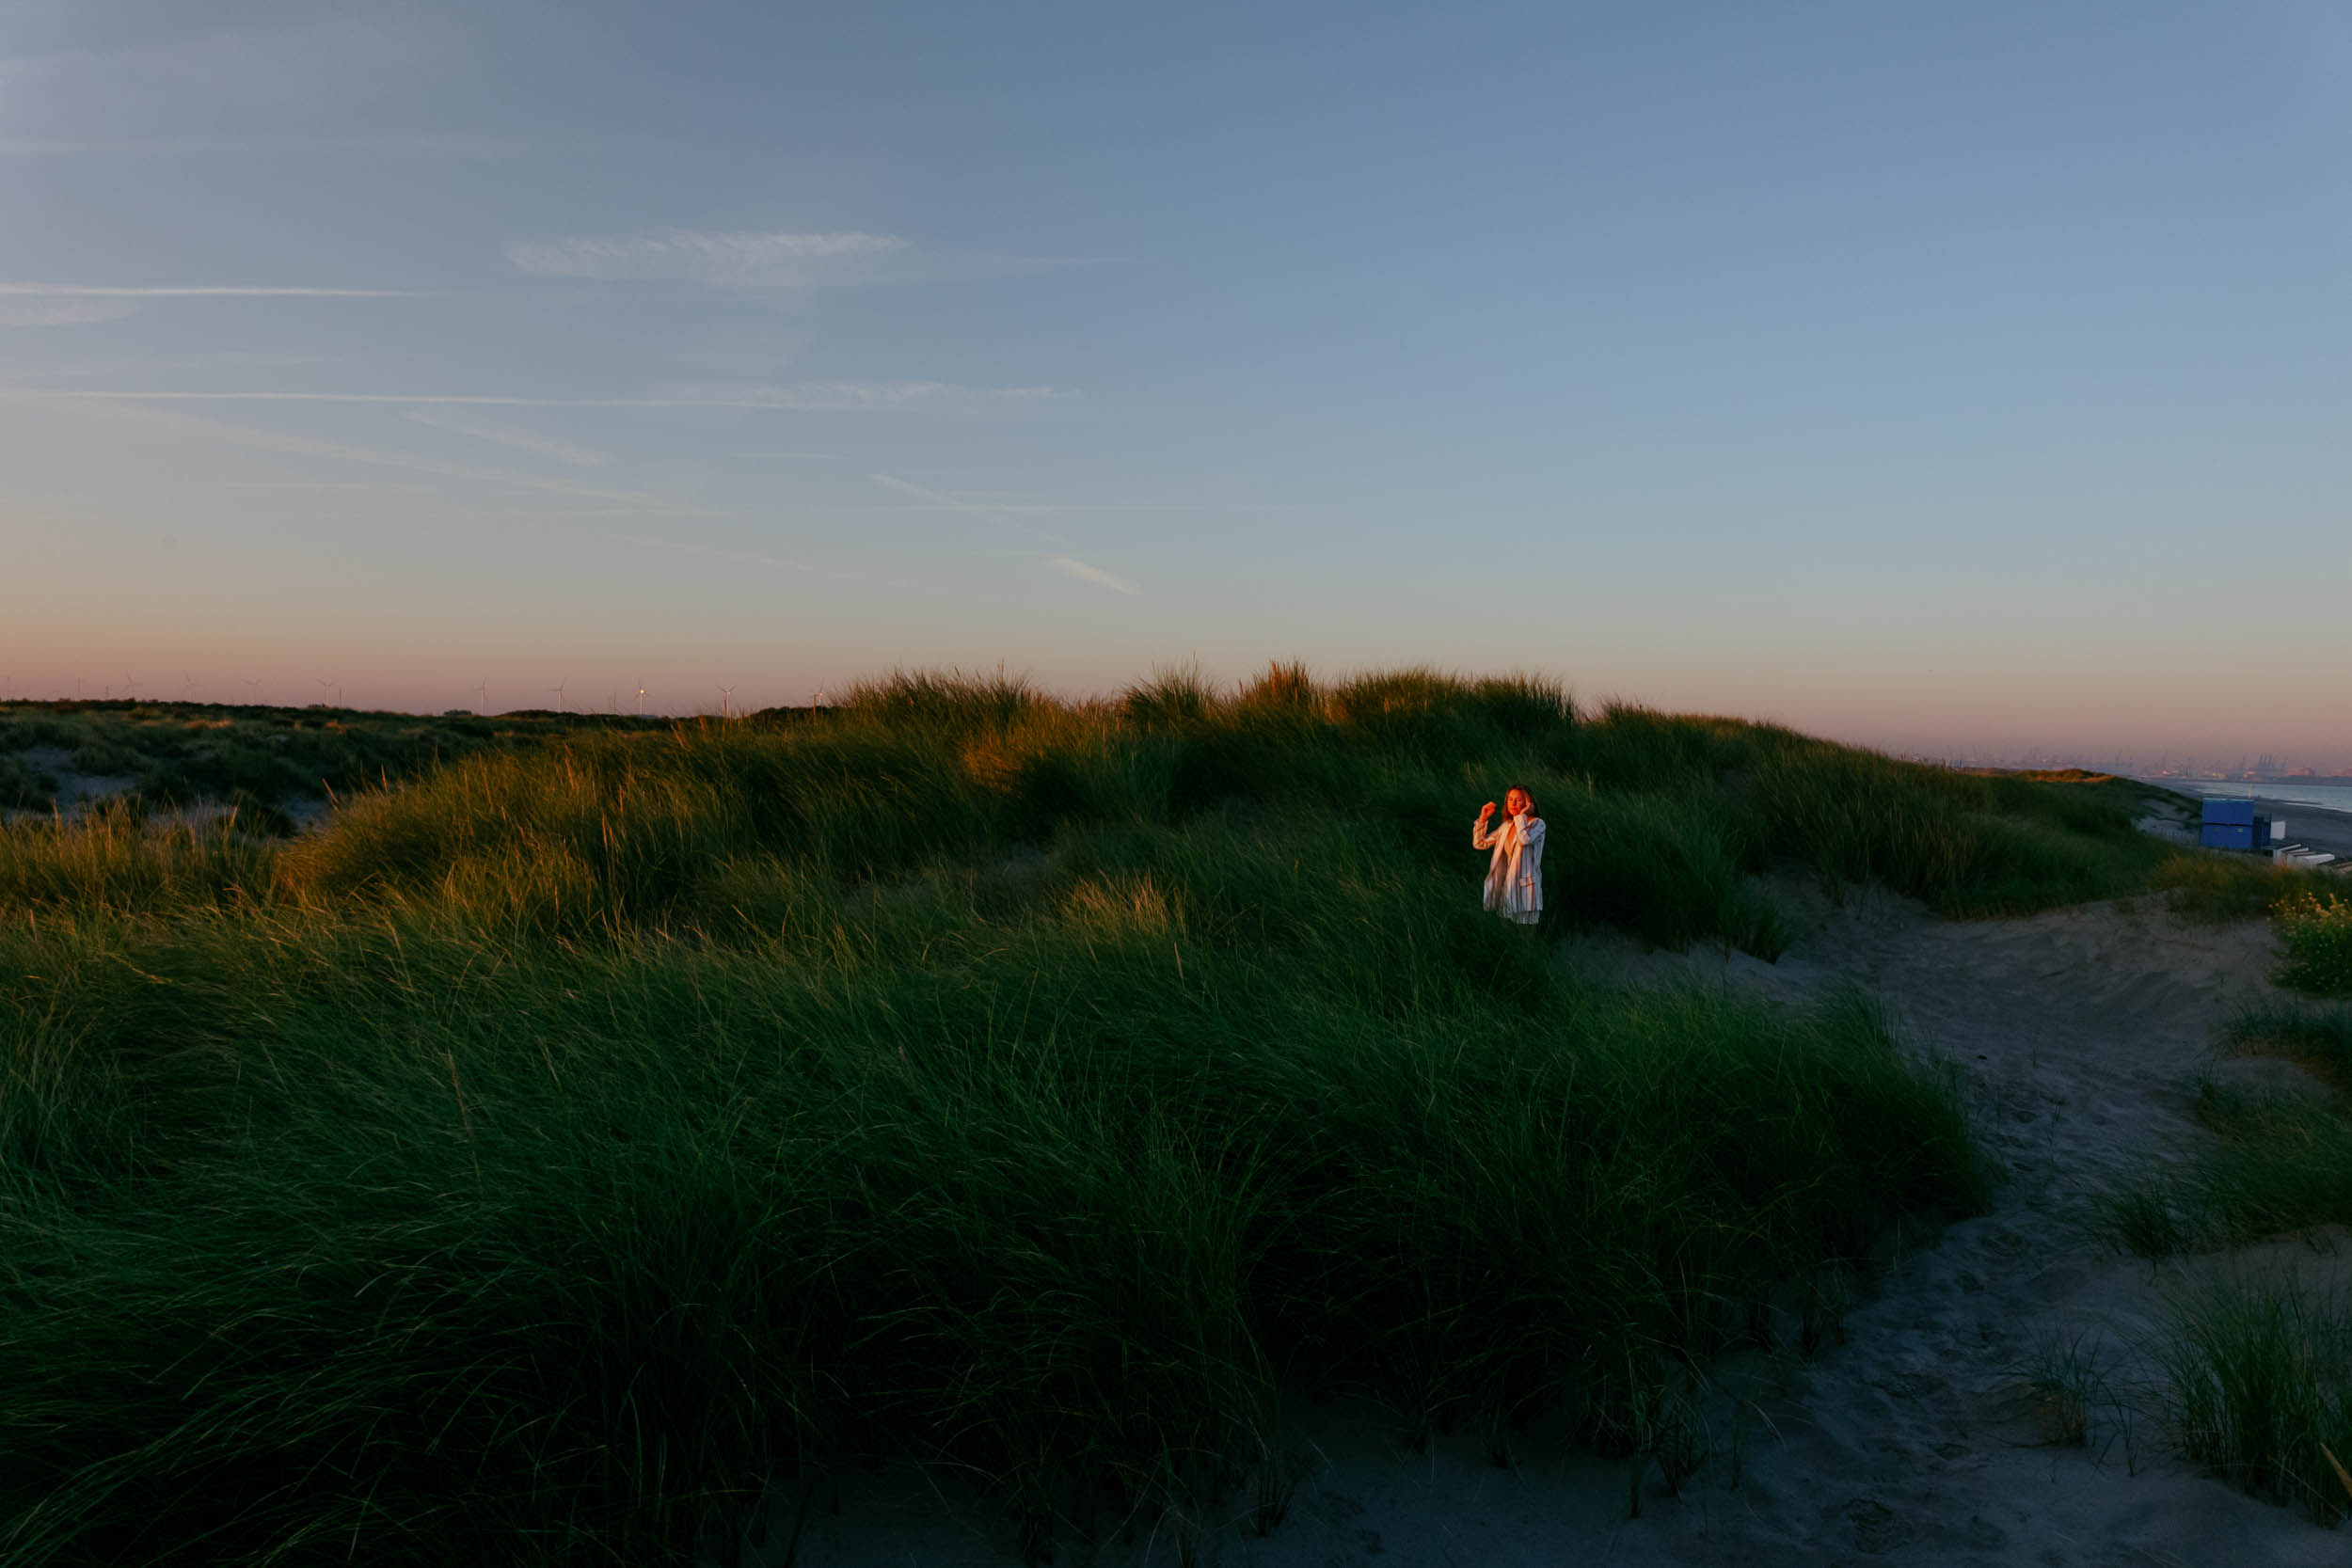 A woman poses for a photograph on a sand dune at sunset.